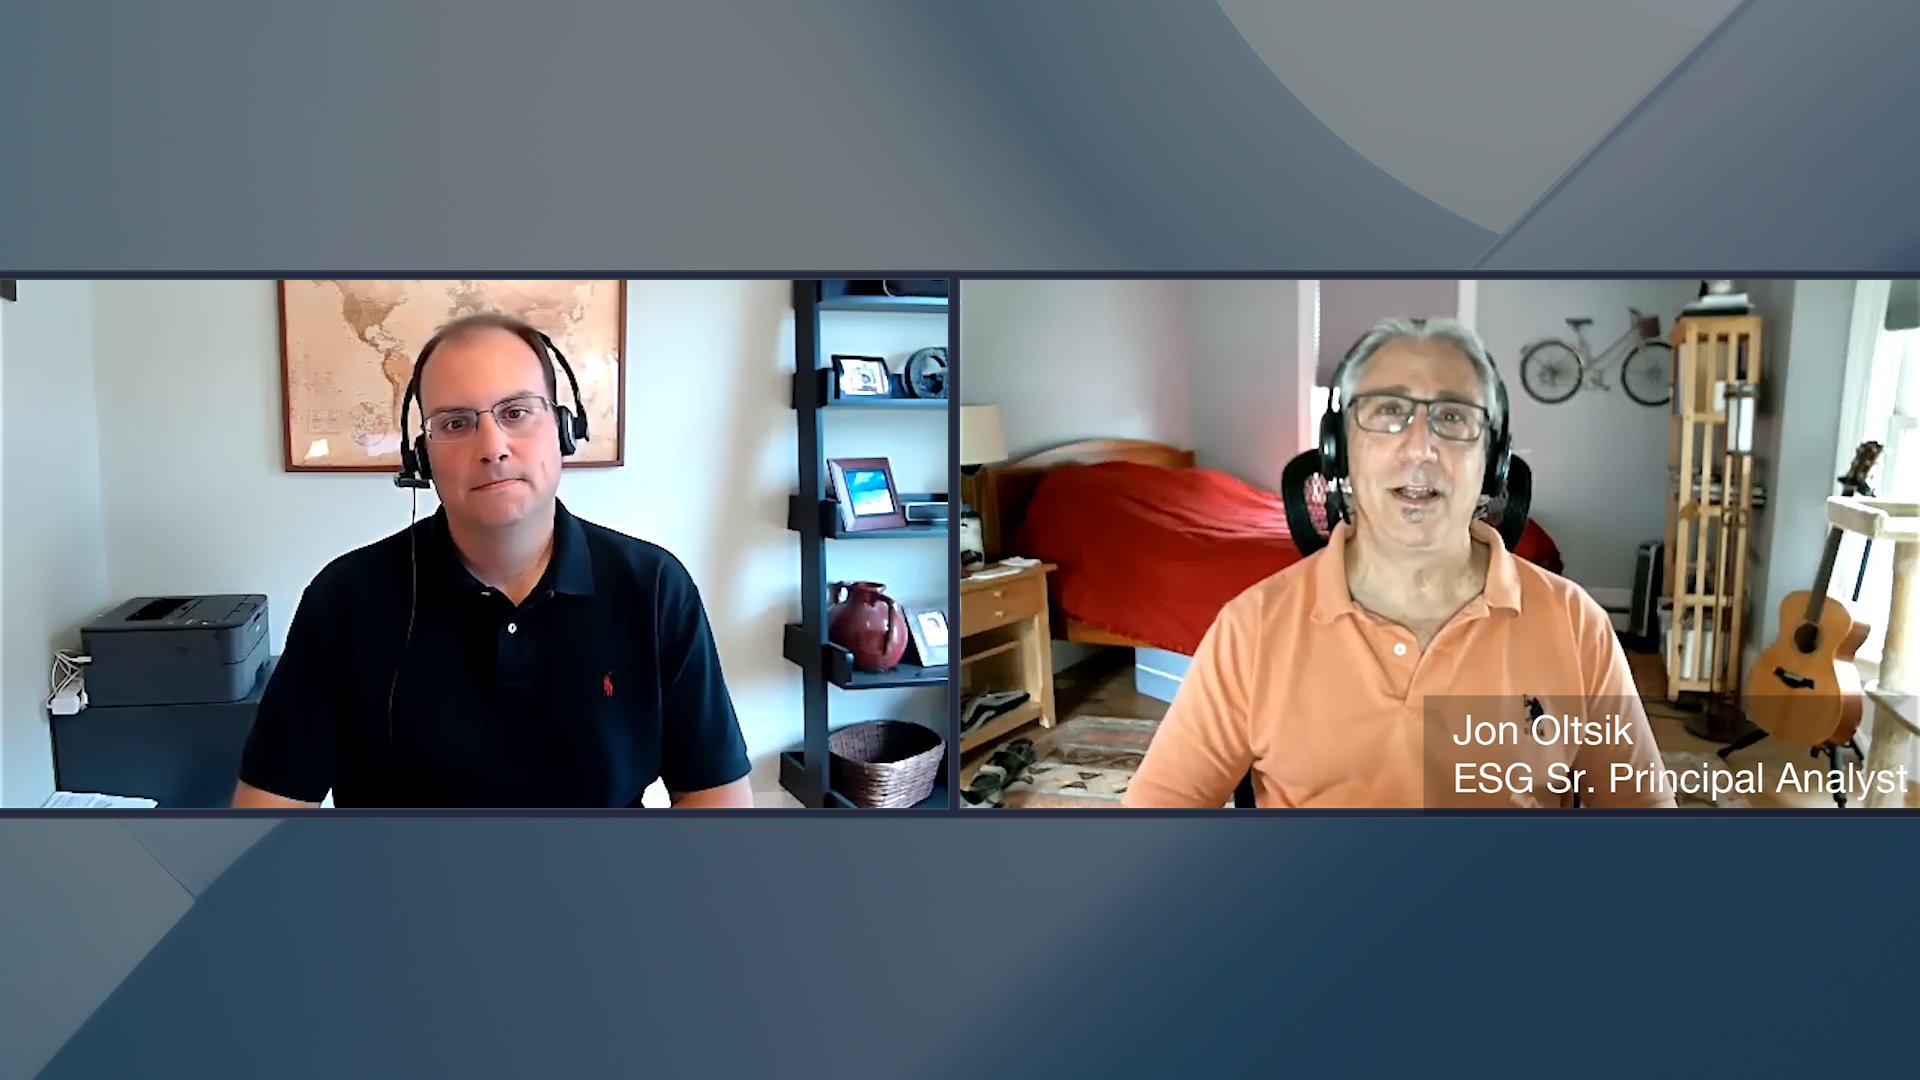 Elastic Cloud Gateway Research Discussion with Jon Oltsik and John Grady